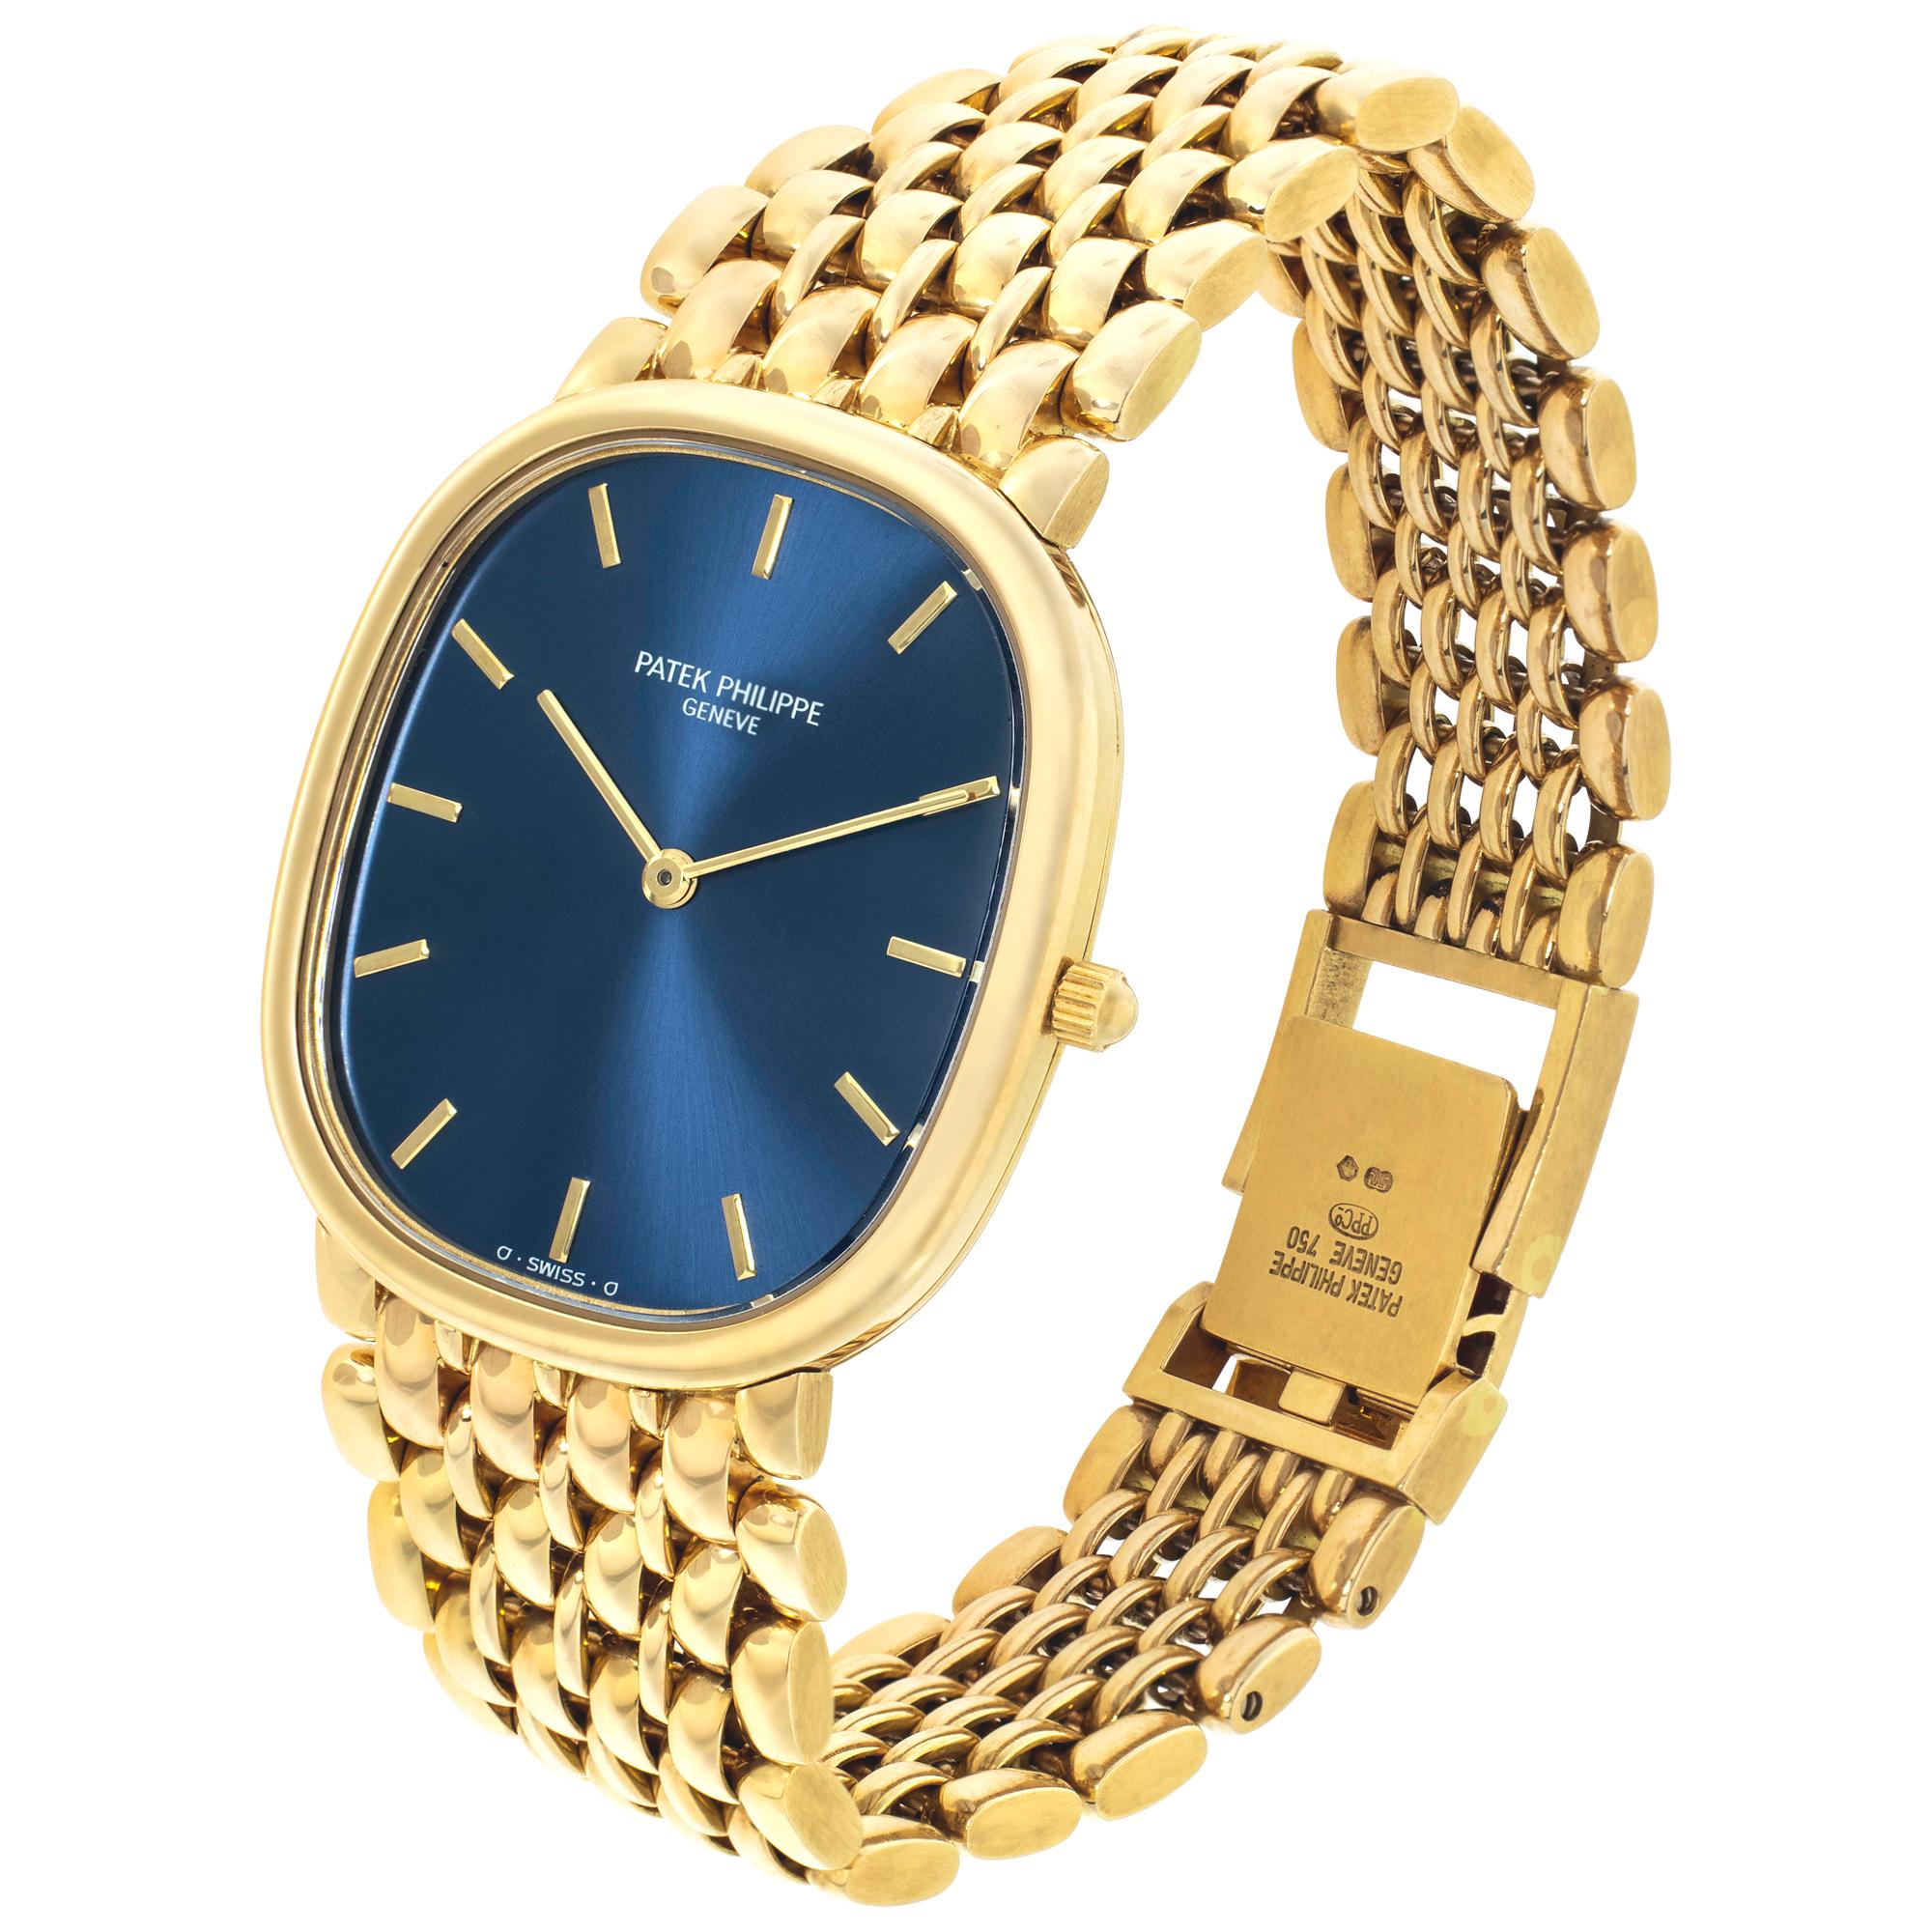 Patek Philippe Golden Ellipse with iconic blue stick dial in 18k. Auto. 34 mm length by 30 mm width case size. Ref 3738/122. Circa 1990s. Fine Pre-owned Patek Philippe Watch.

 Certified preowned Dress Patek Philippe Ellipse 3738/122 watch is made